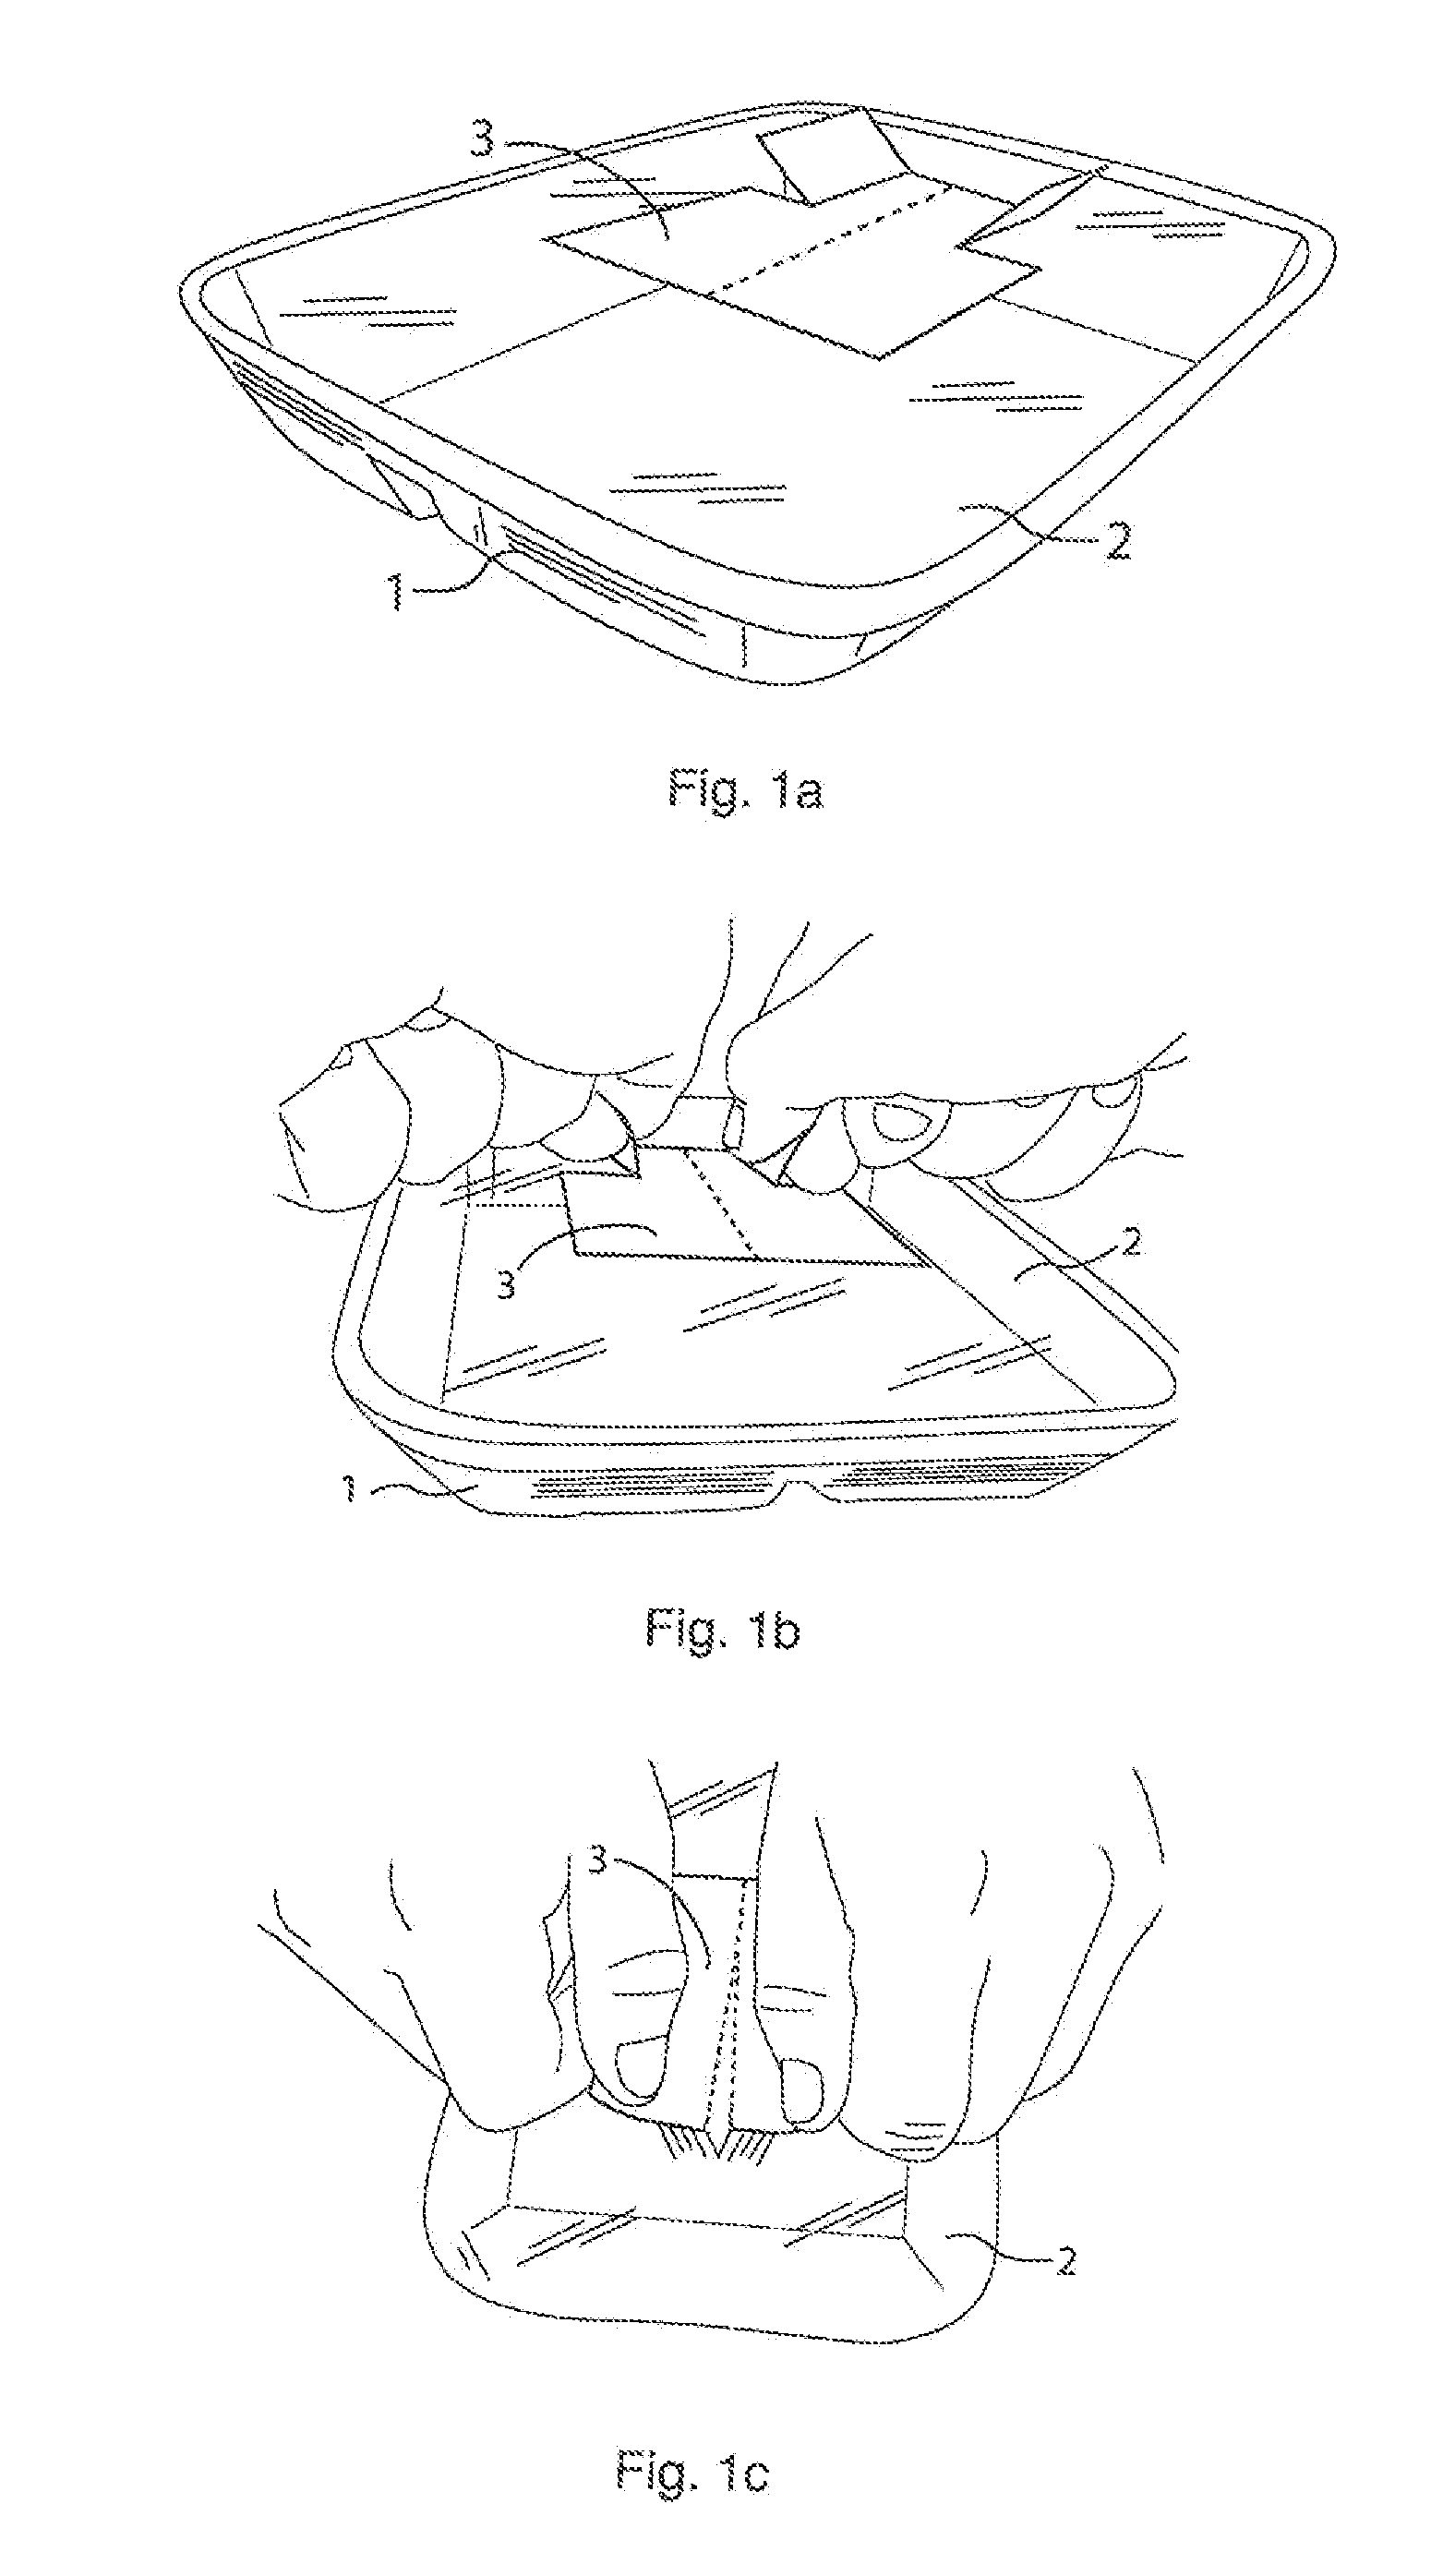 Wrapping Tearing Device